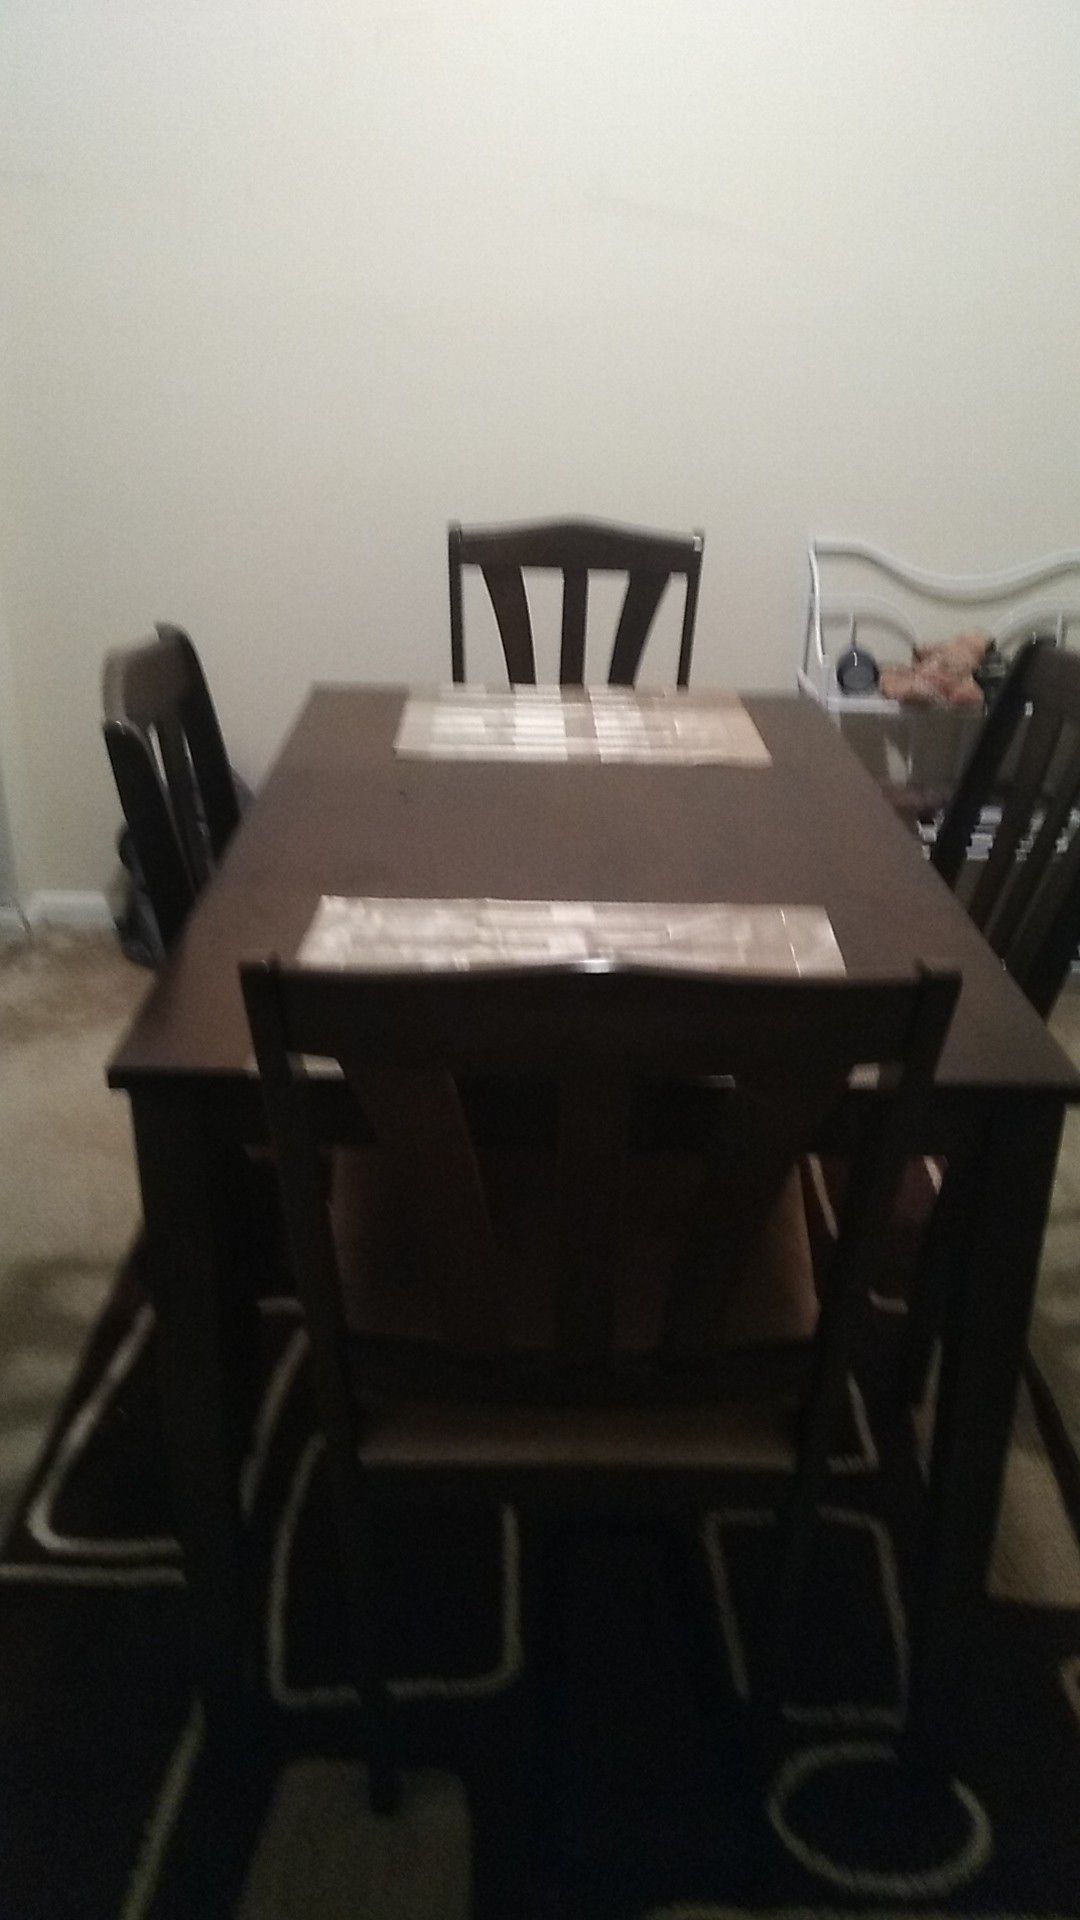 Brand new table